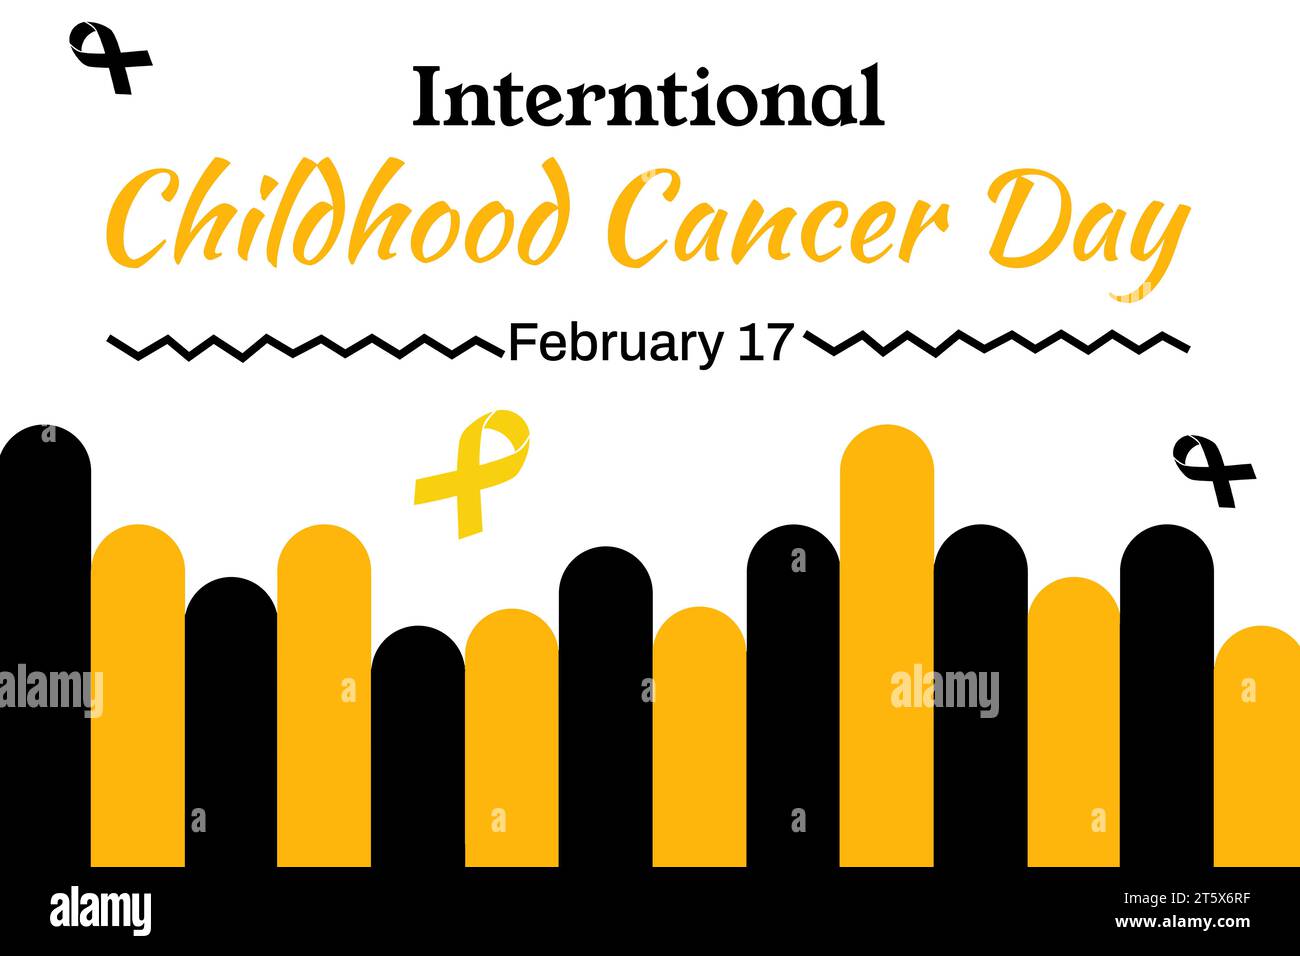 International Childhood Cancer Day backdrop in yellow and black color with typography. February 27 is Childhood cancer day, background Stock Photo